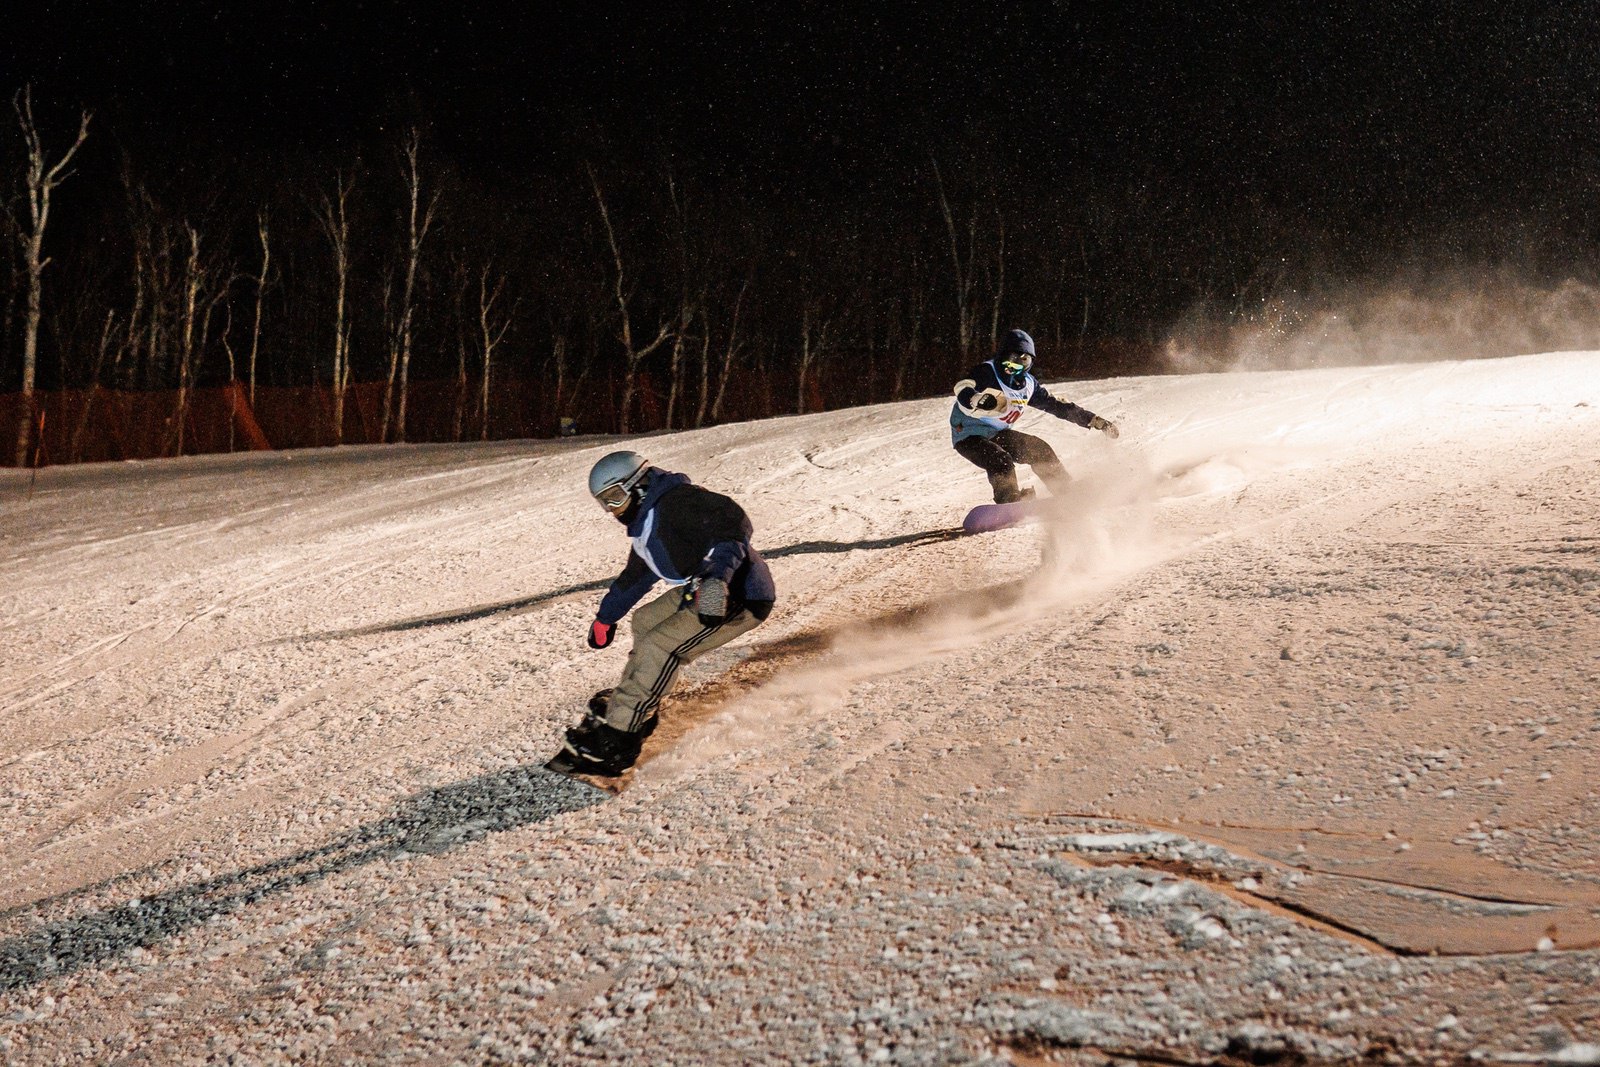 Registration open for WinterKids’ 11th Annual Downhill 24 at Sugarloaf